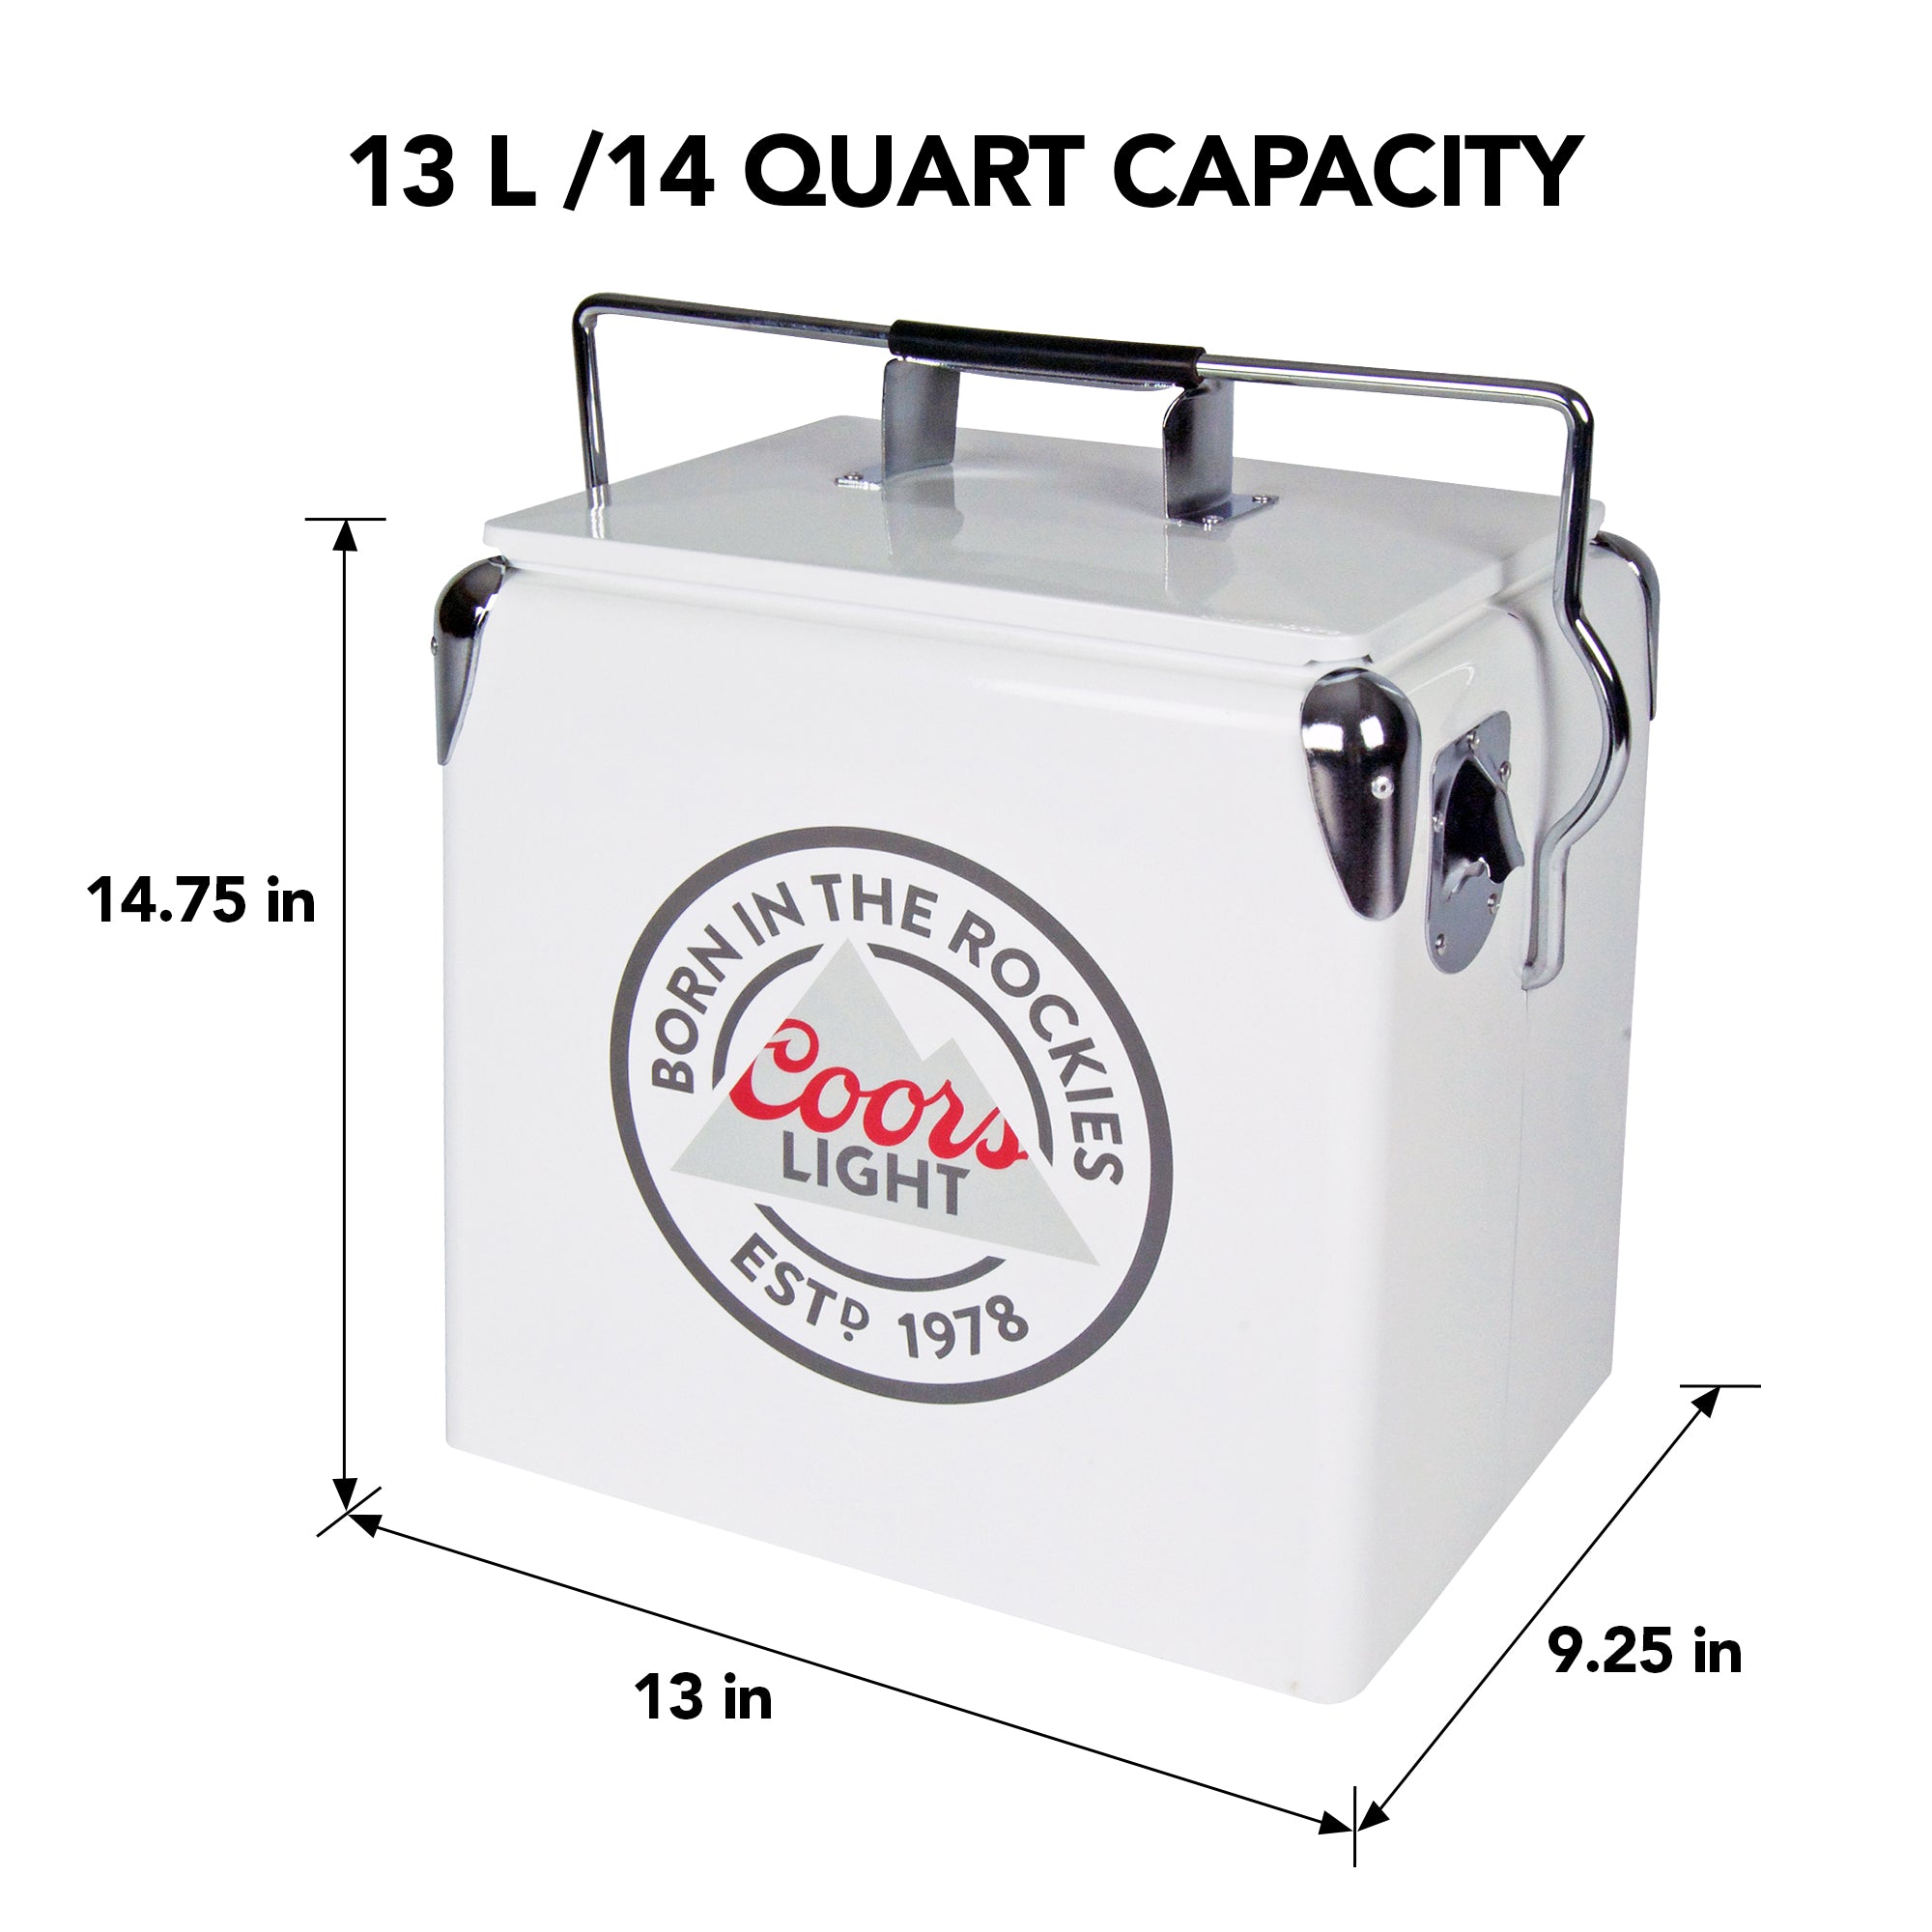 Product shot of Coors Light retro 14 liter ice chest with bottle opener, closed, on a white background, with dimensions labeled. Text above reads, "13L/14 quart capacity"